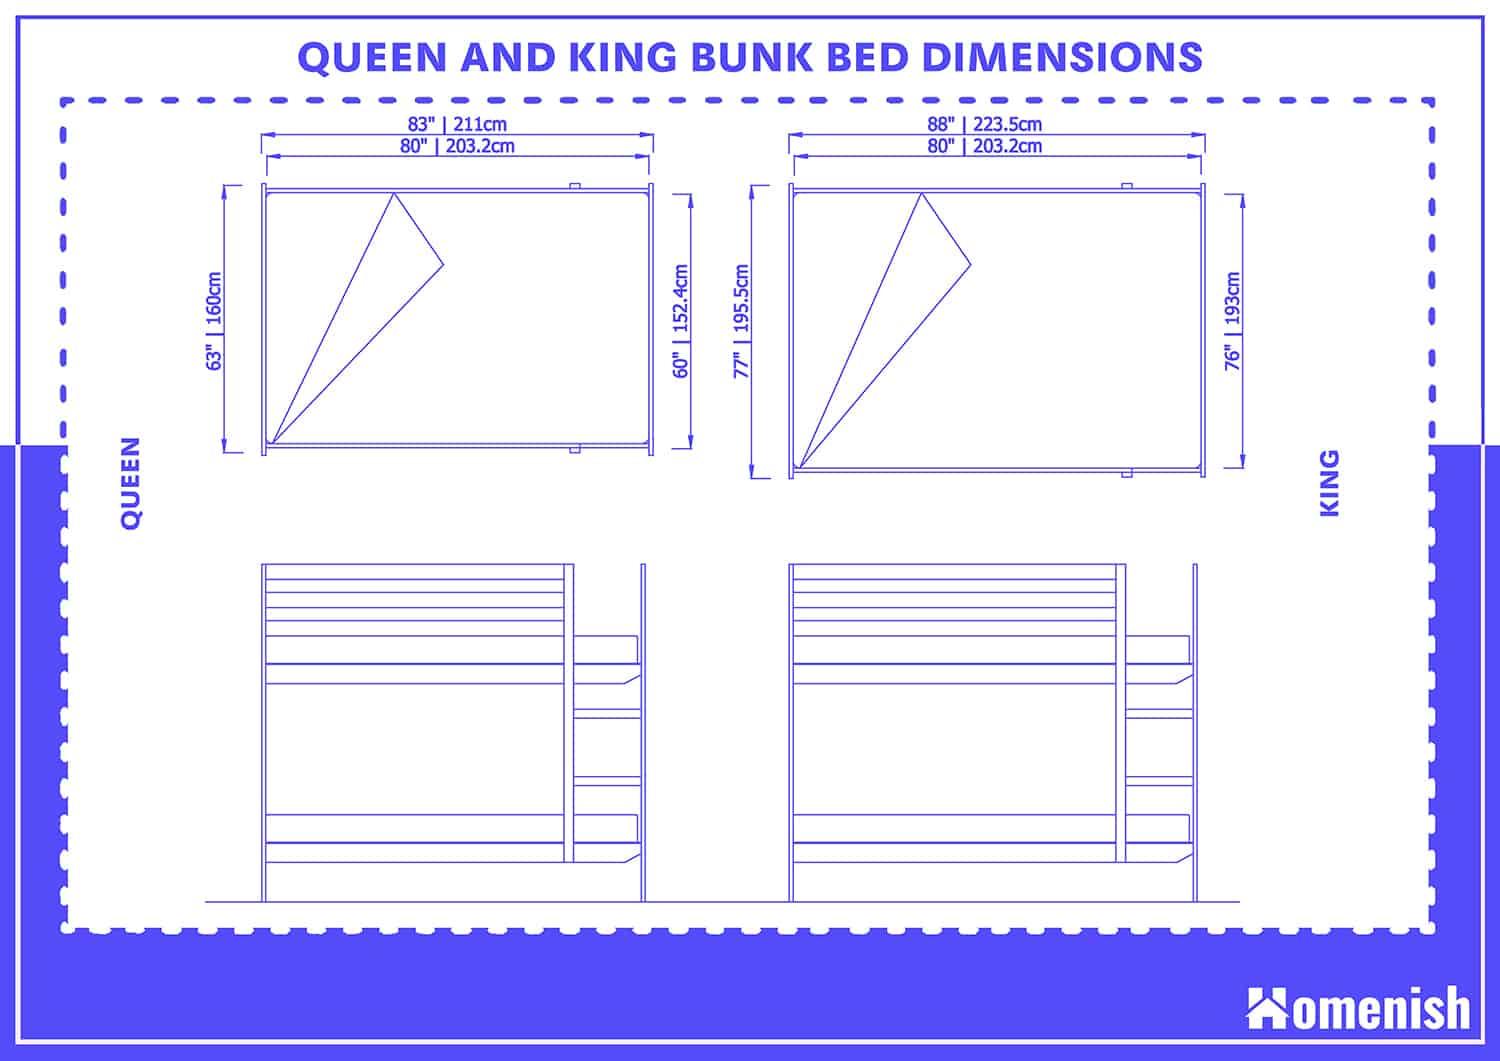 Queen and King Bunk Bed Dimensions